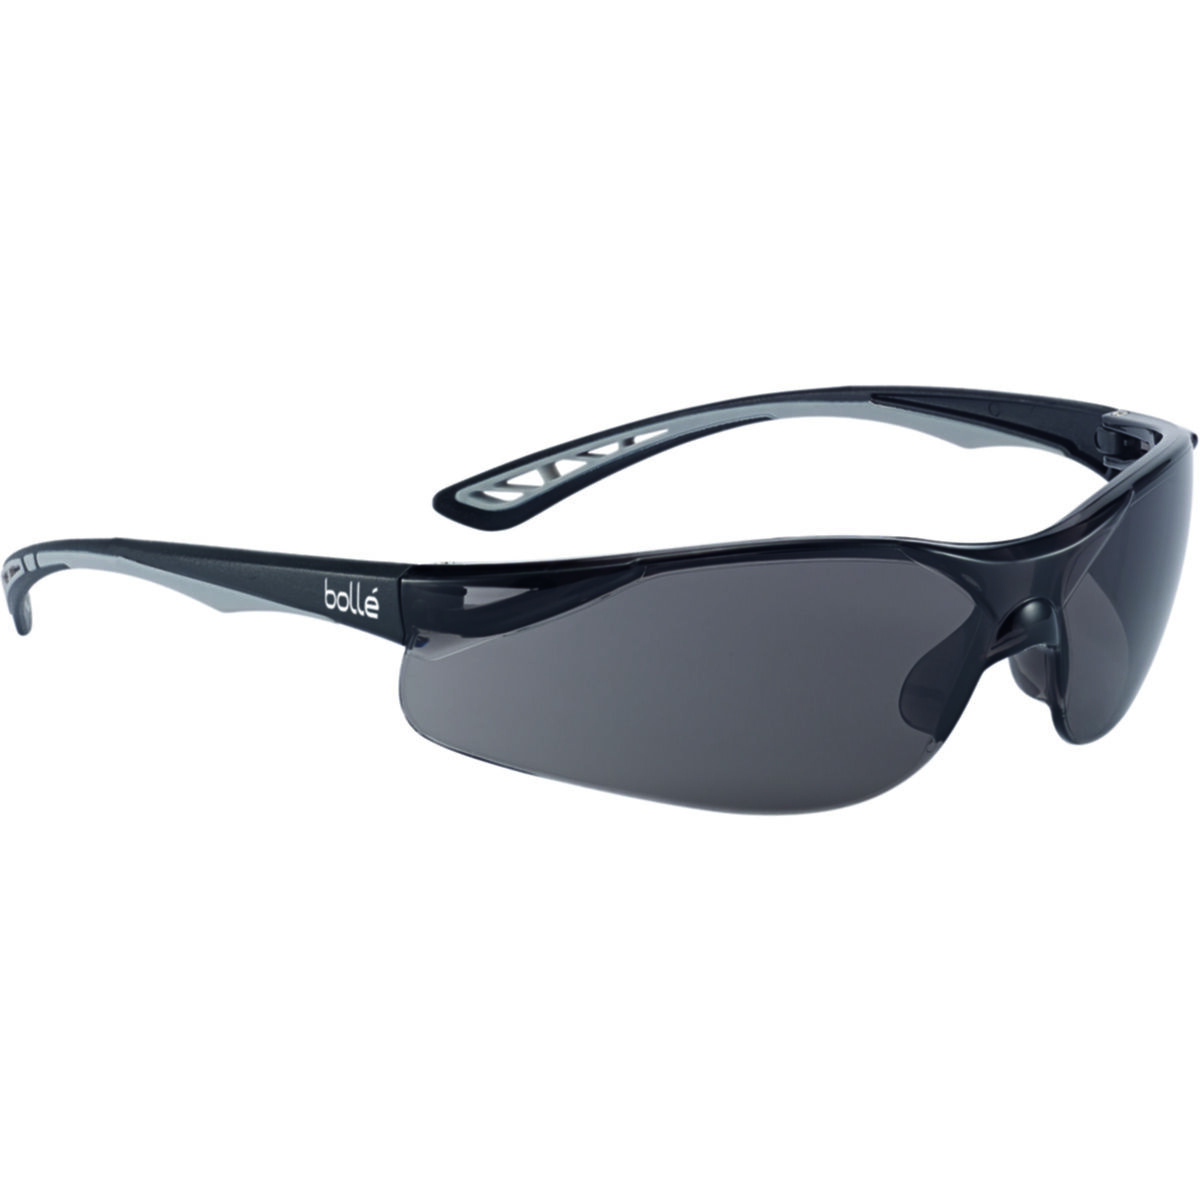 Bolle Ness Range Sports Cycling Safety Glasses Spectacles Eye Protection 